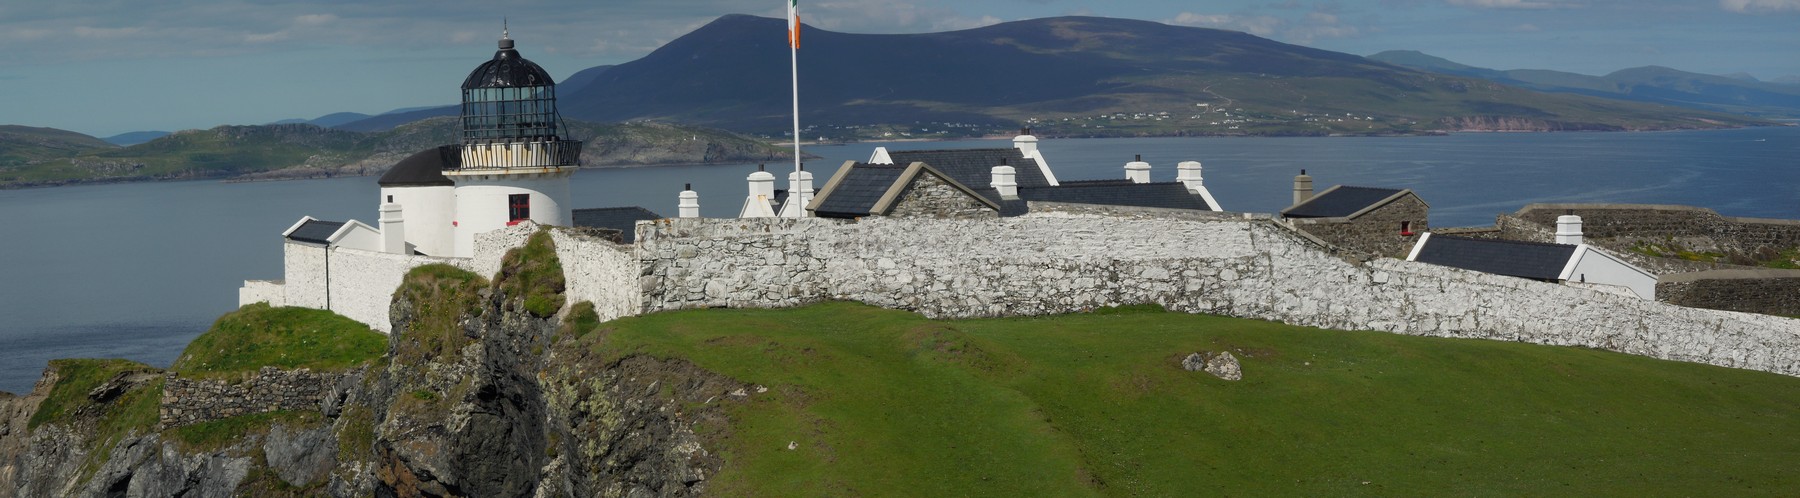 Clare Island Lighthouse with Achill in the background - such buildings became unnecessary for the operation of a lighthouse and were sold